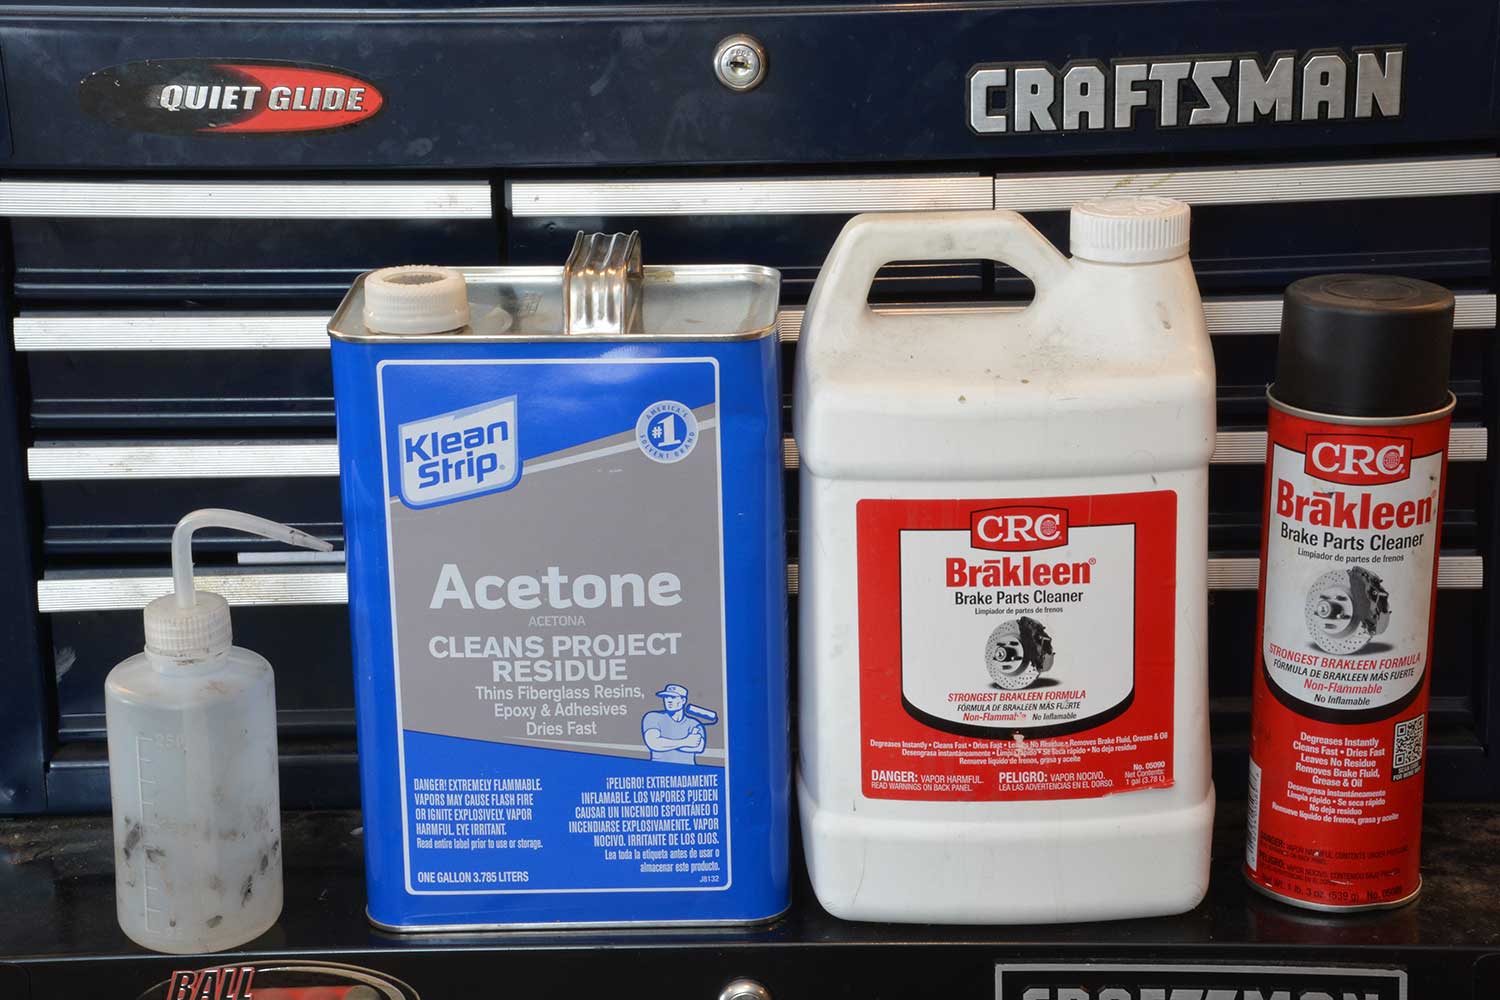 Two containers of Acetone and Brakleen.